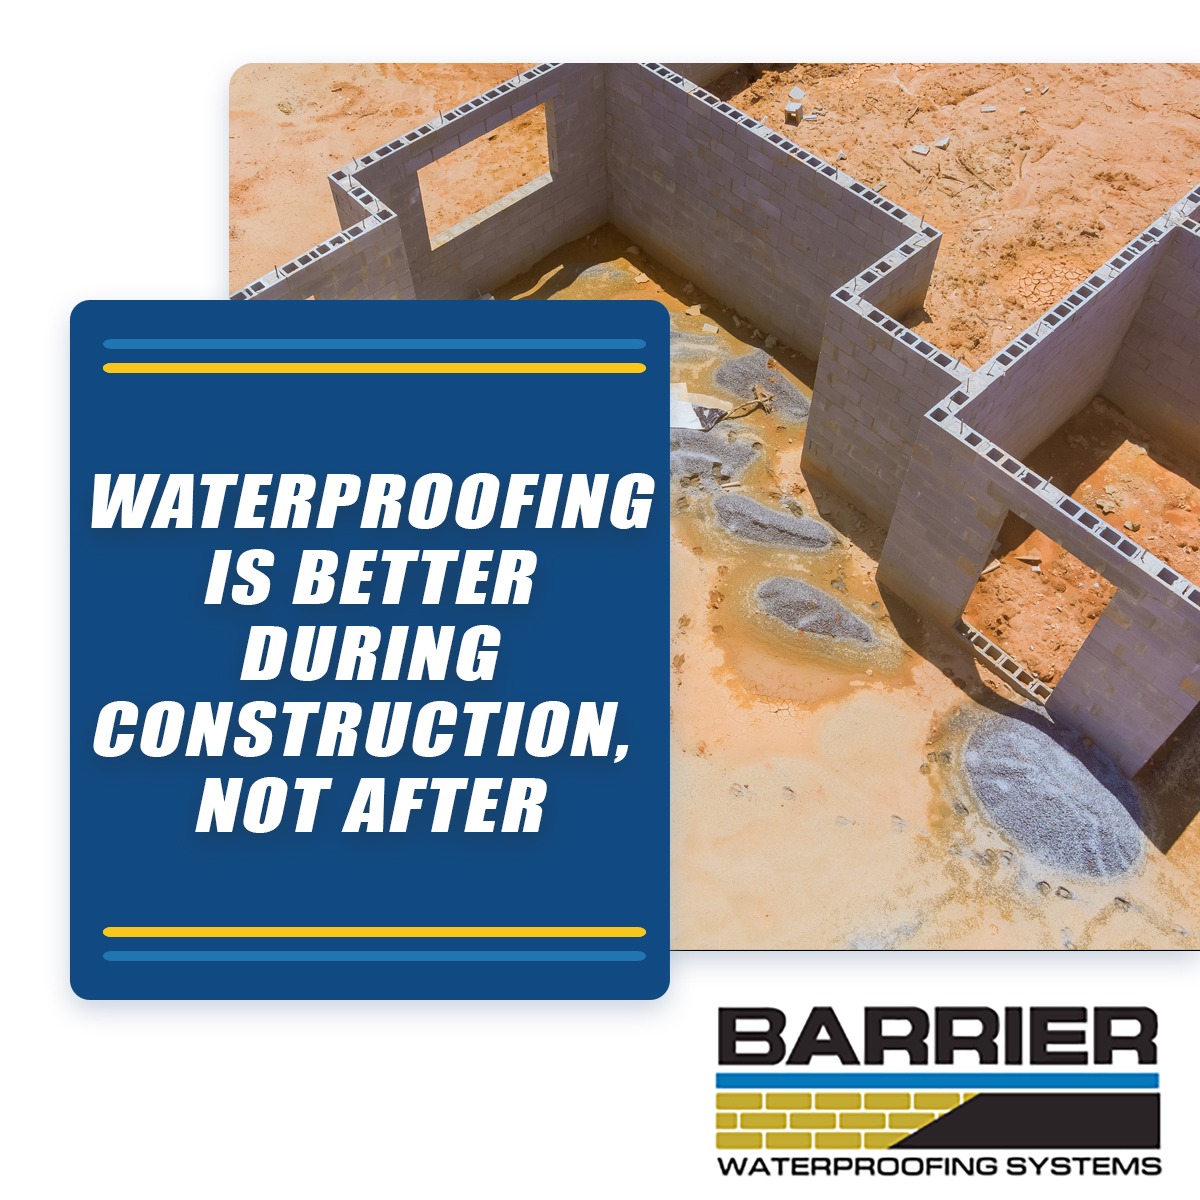 Waterproofing is better during construction, not after.